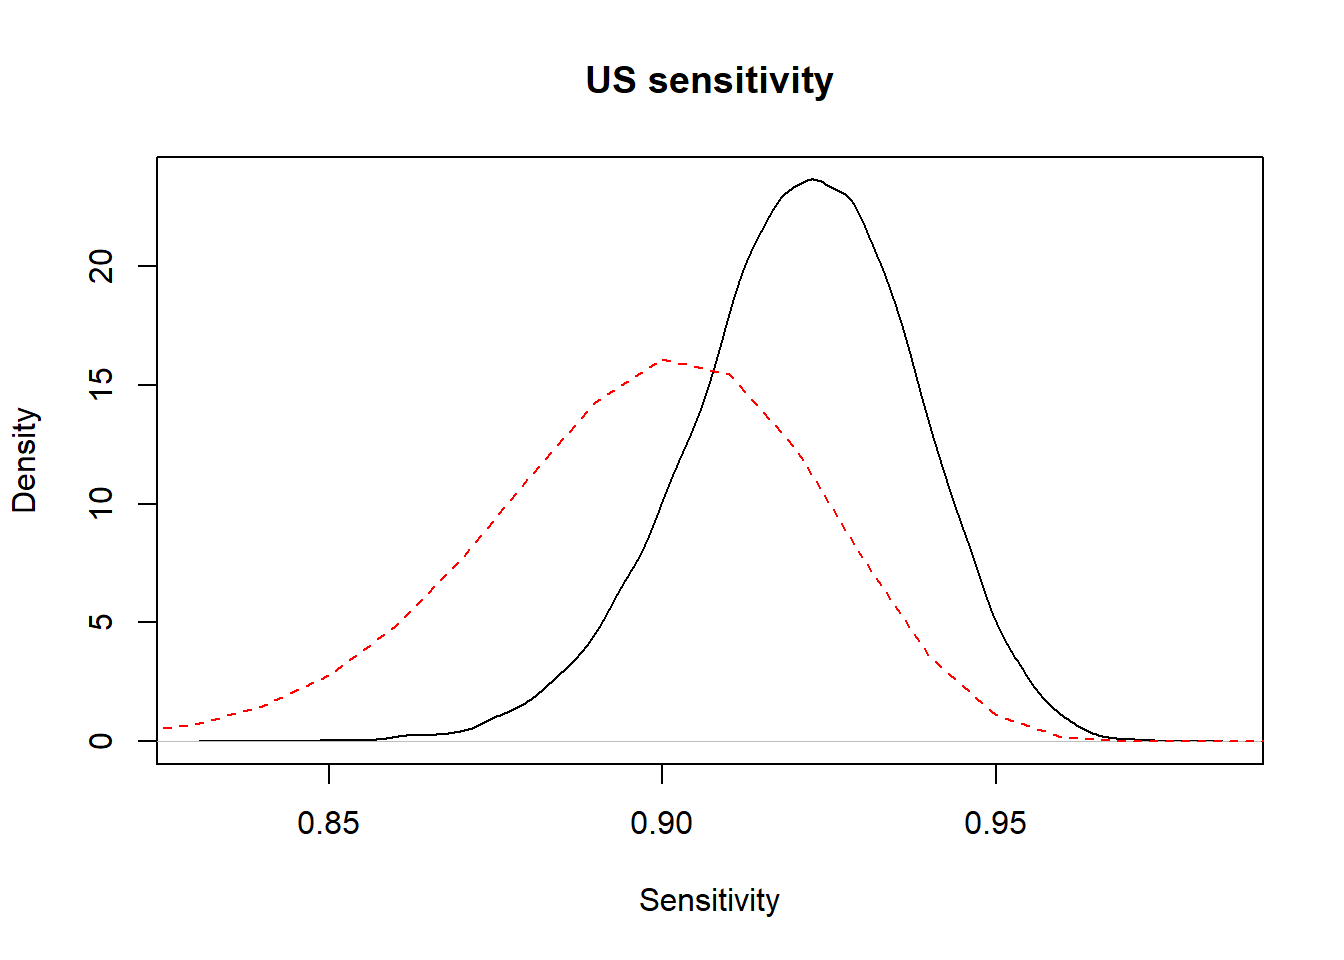 Prior (dashed red line) and posterior (full black line) distribution of US sensitivity.